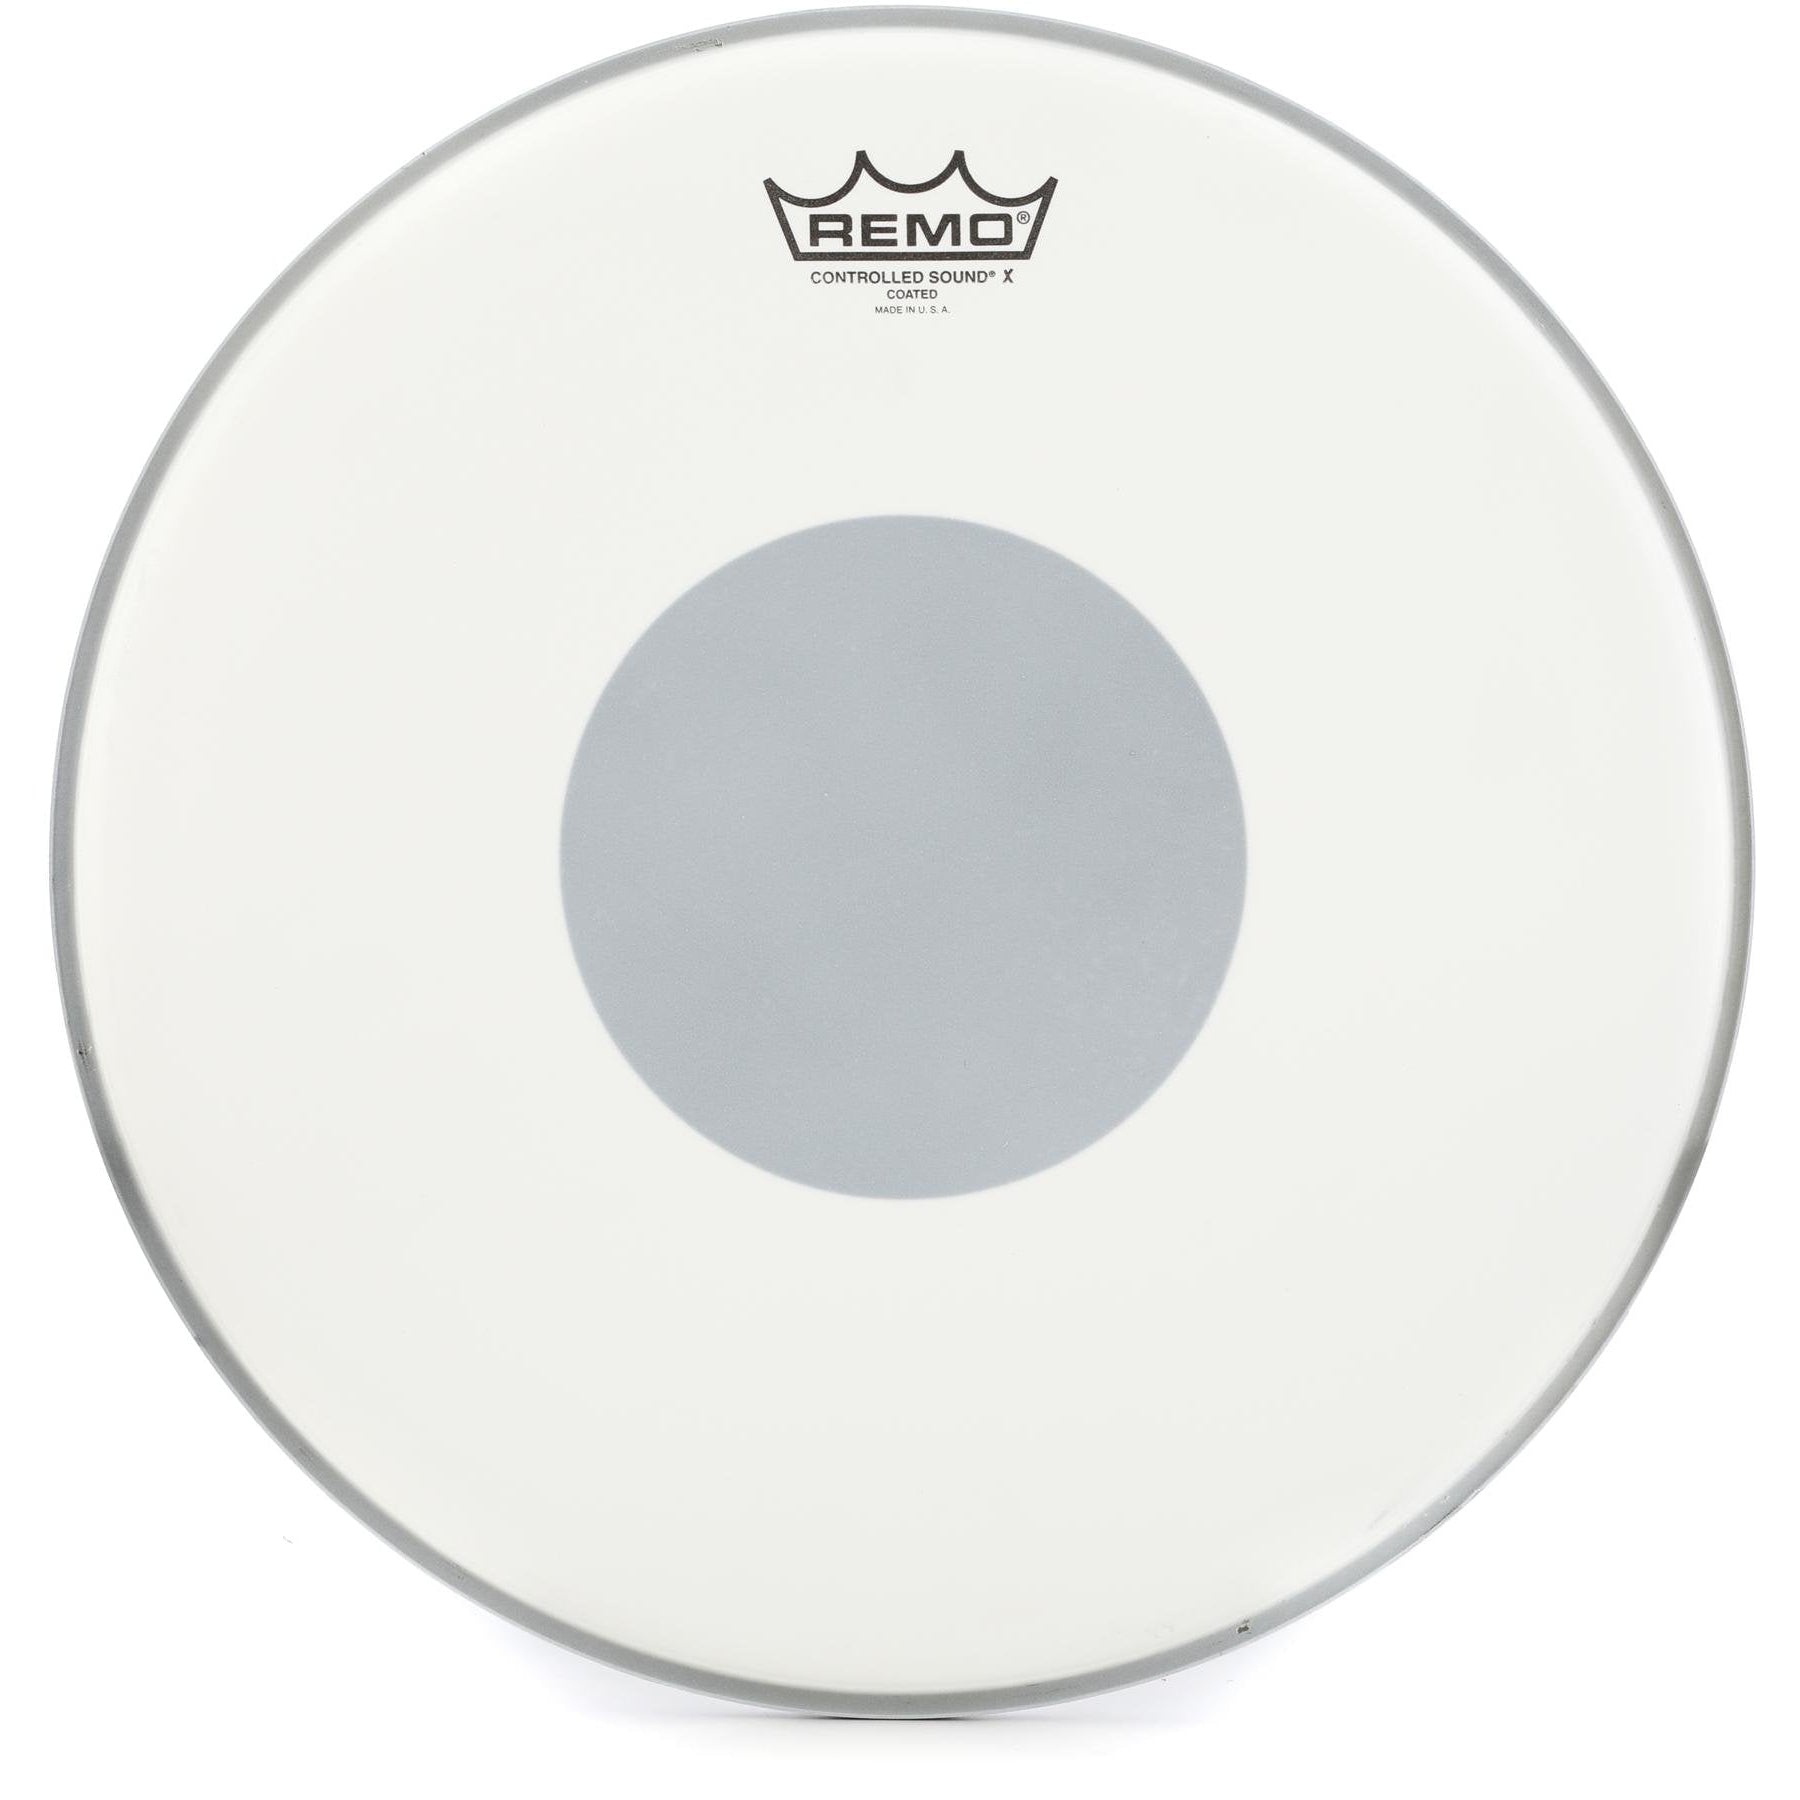 Mặt Trống Remo CX-0114-10 14inch Controlled Sound X Drum Head - Việt Music